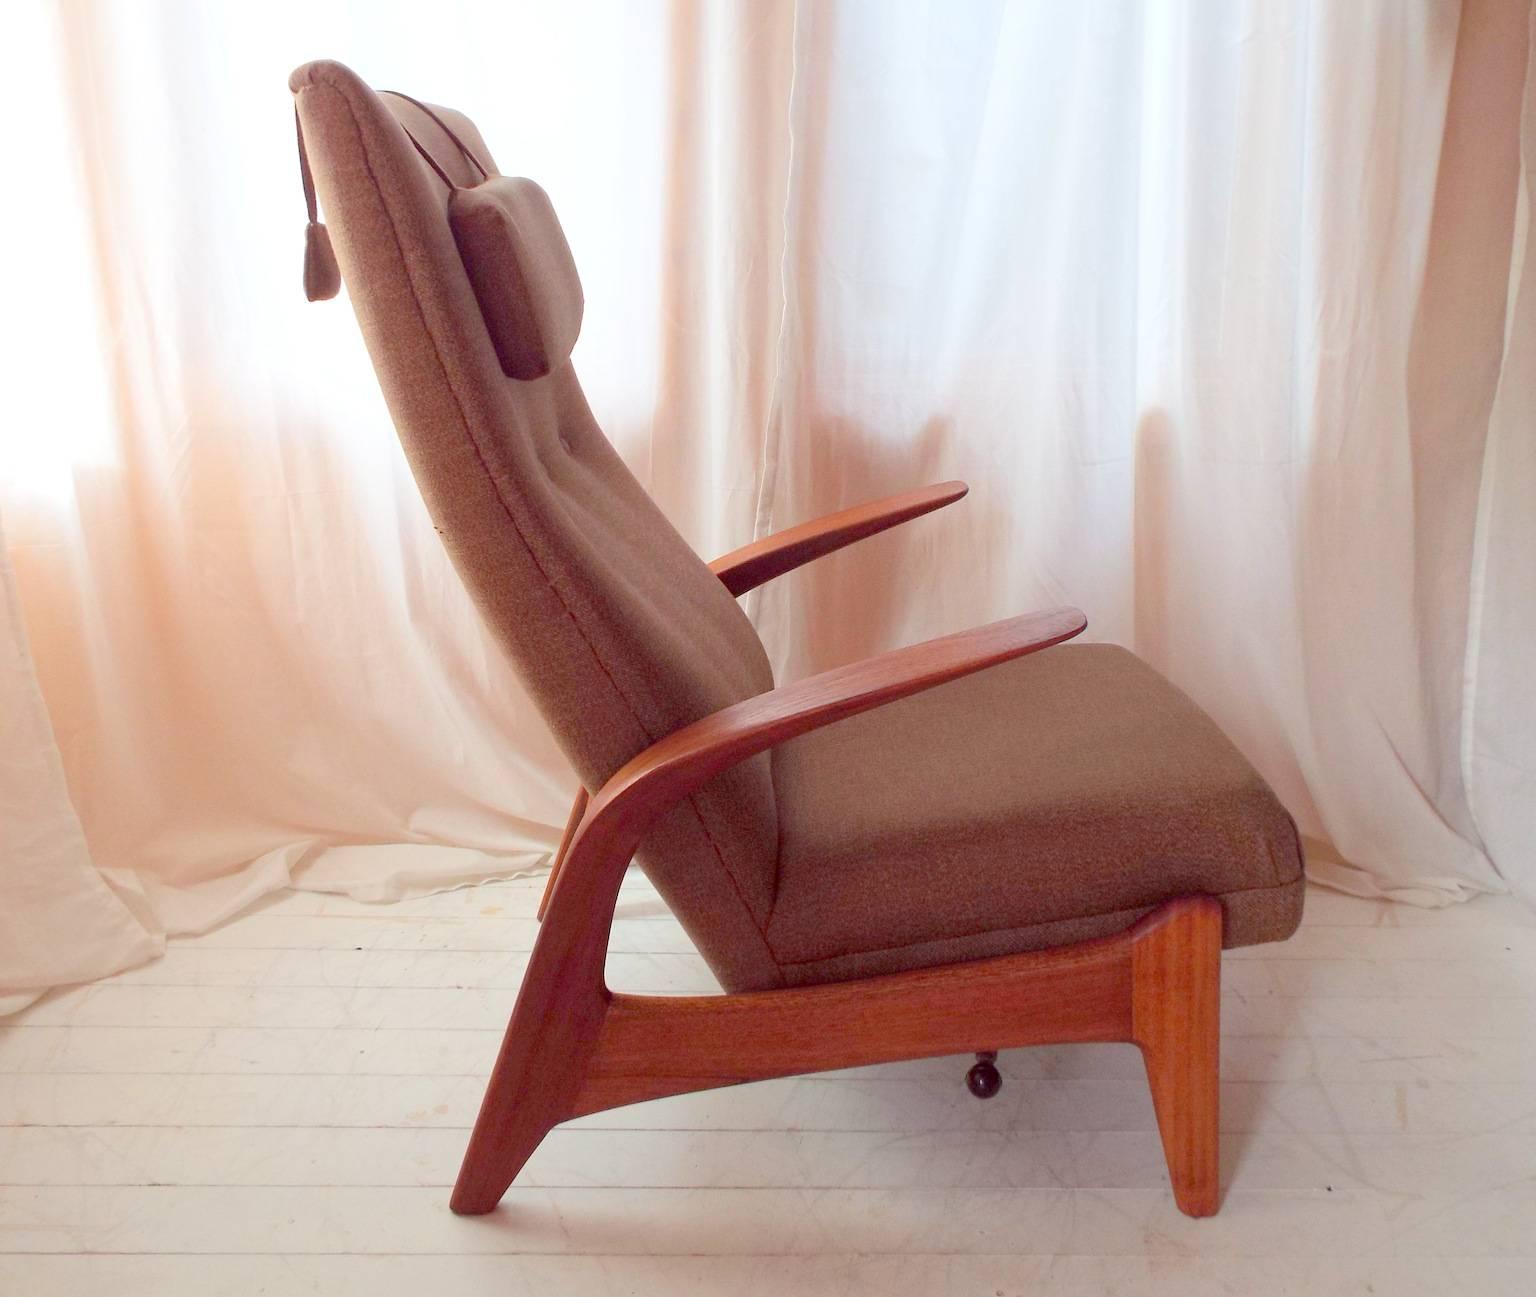 European 1960s Gimson & Slater Rock'n'rest Lounge Chair with Original Twill Upholstery For Sale